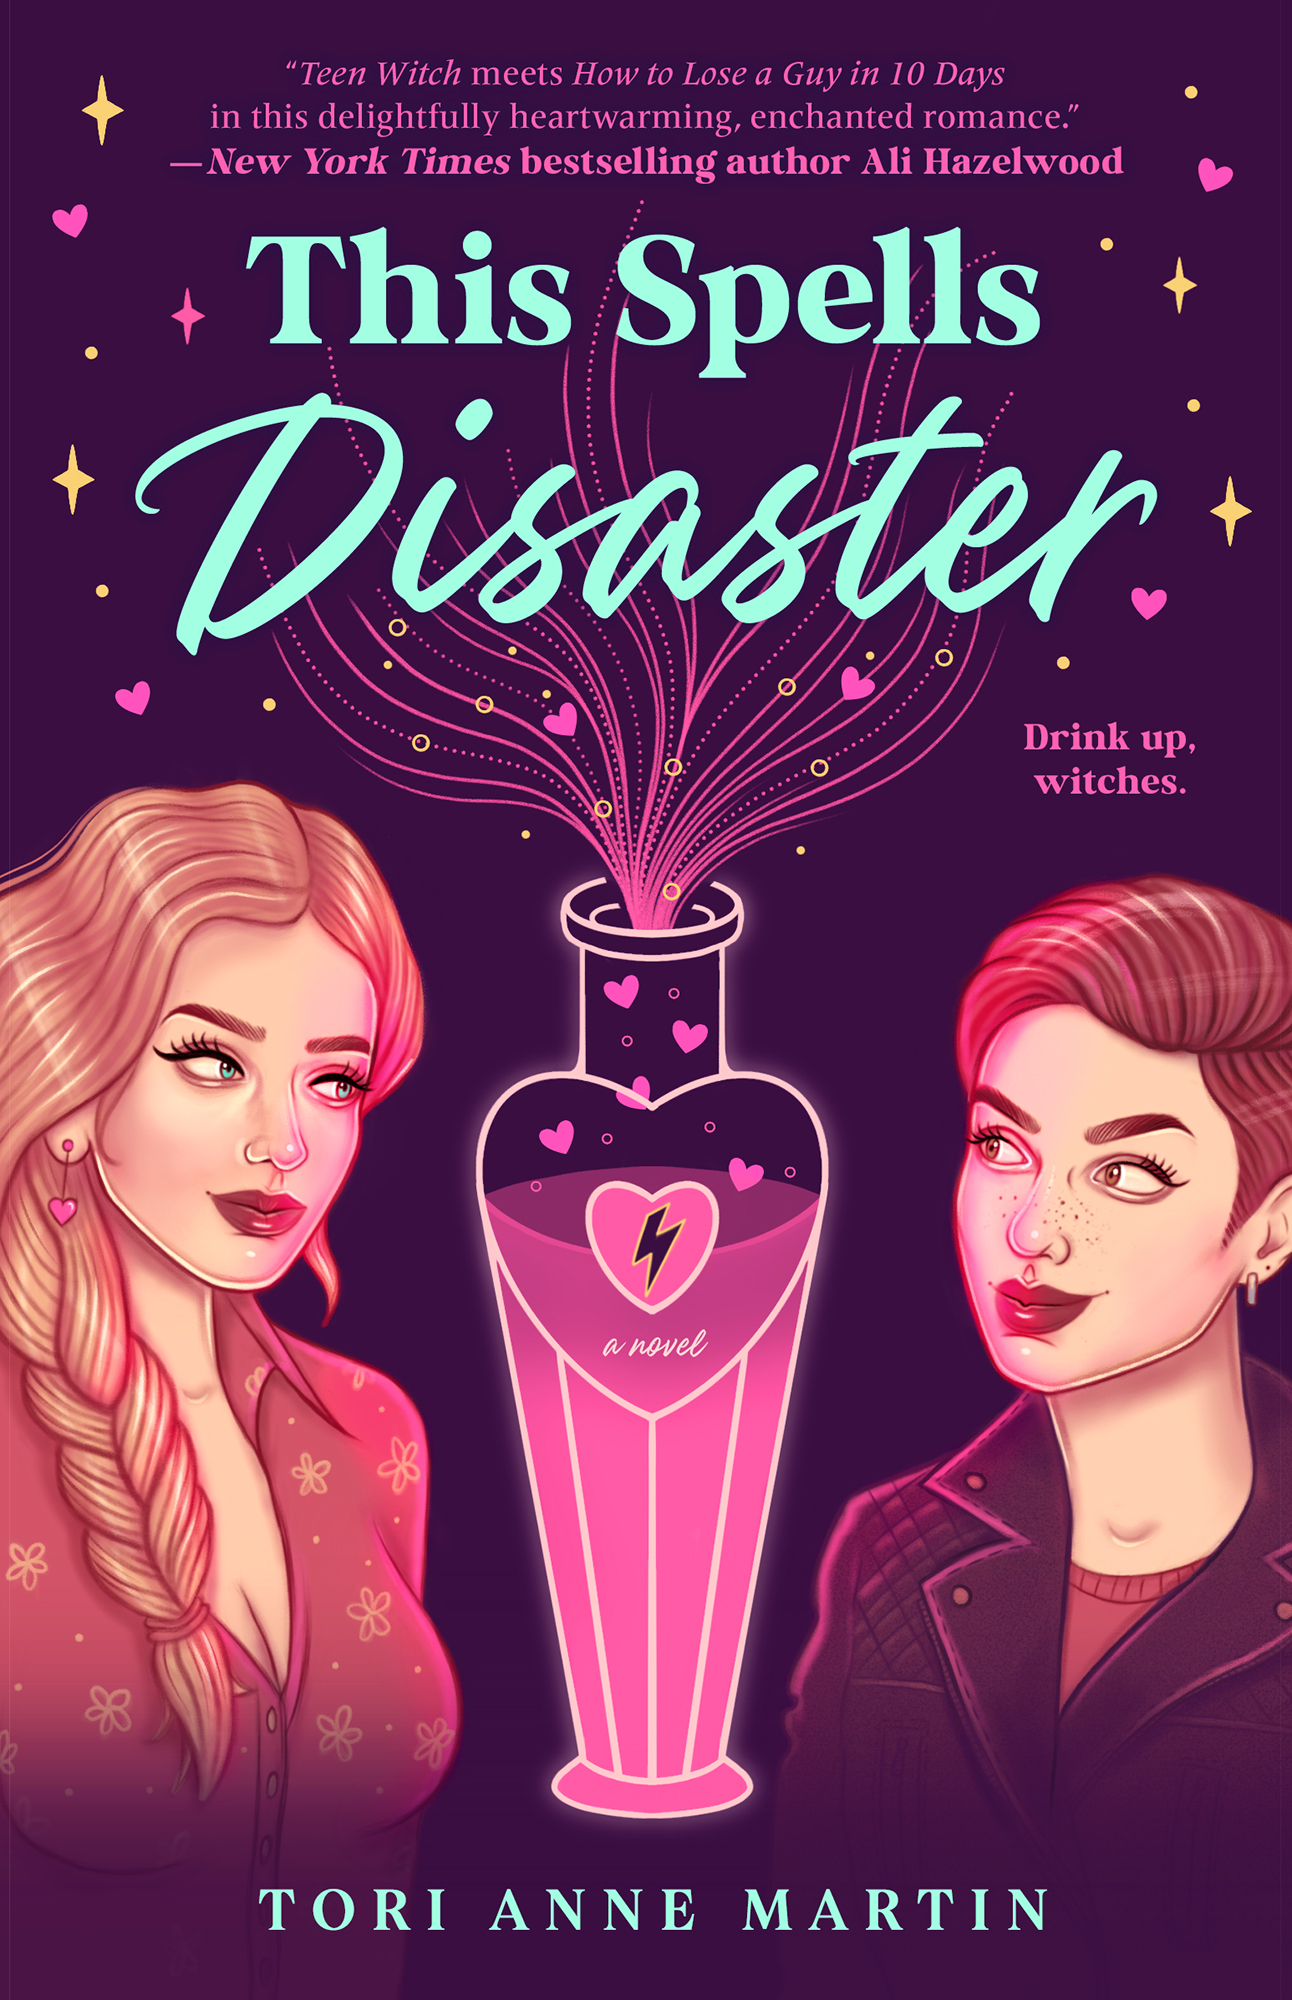 Cover for This Spells Disaster features the two main characters, Morgan (a witch with a long, blond braid and heart-shaped earrings) and Rory (a witch with short, dark hair and freckles) staring at each other, along with a heart-shaped potion bottle between them.